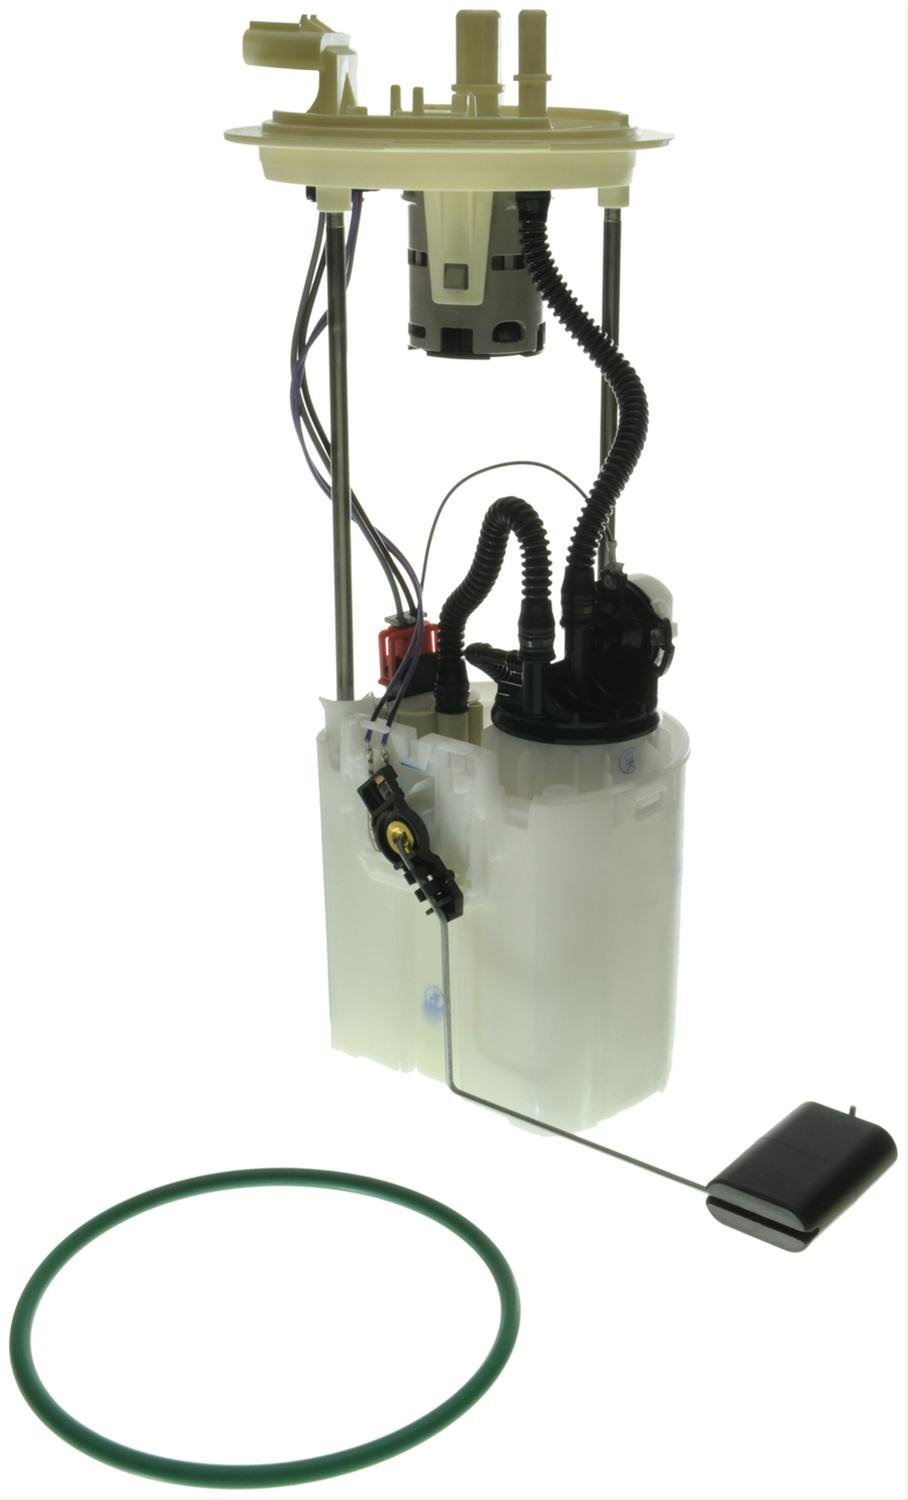 OE Ford Replacement Fuel Pump Module Assembly for 2009-2014 Ford F-150